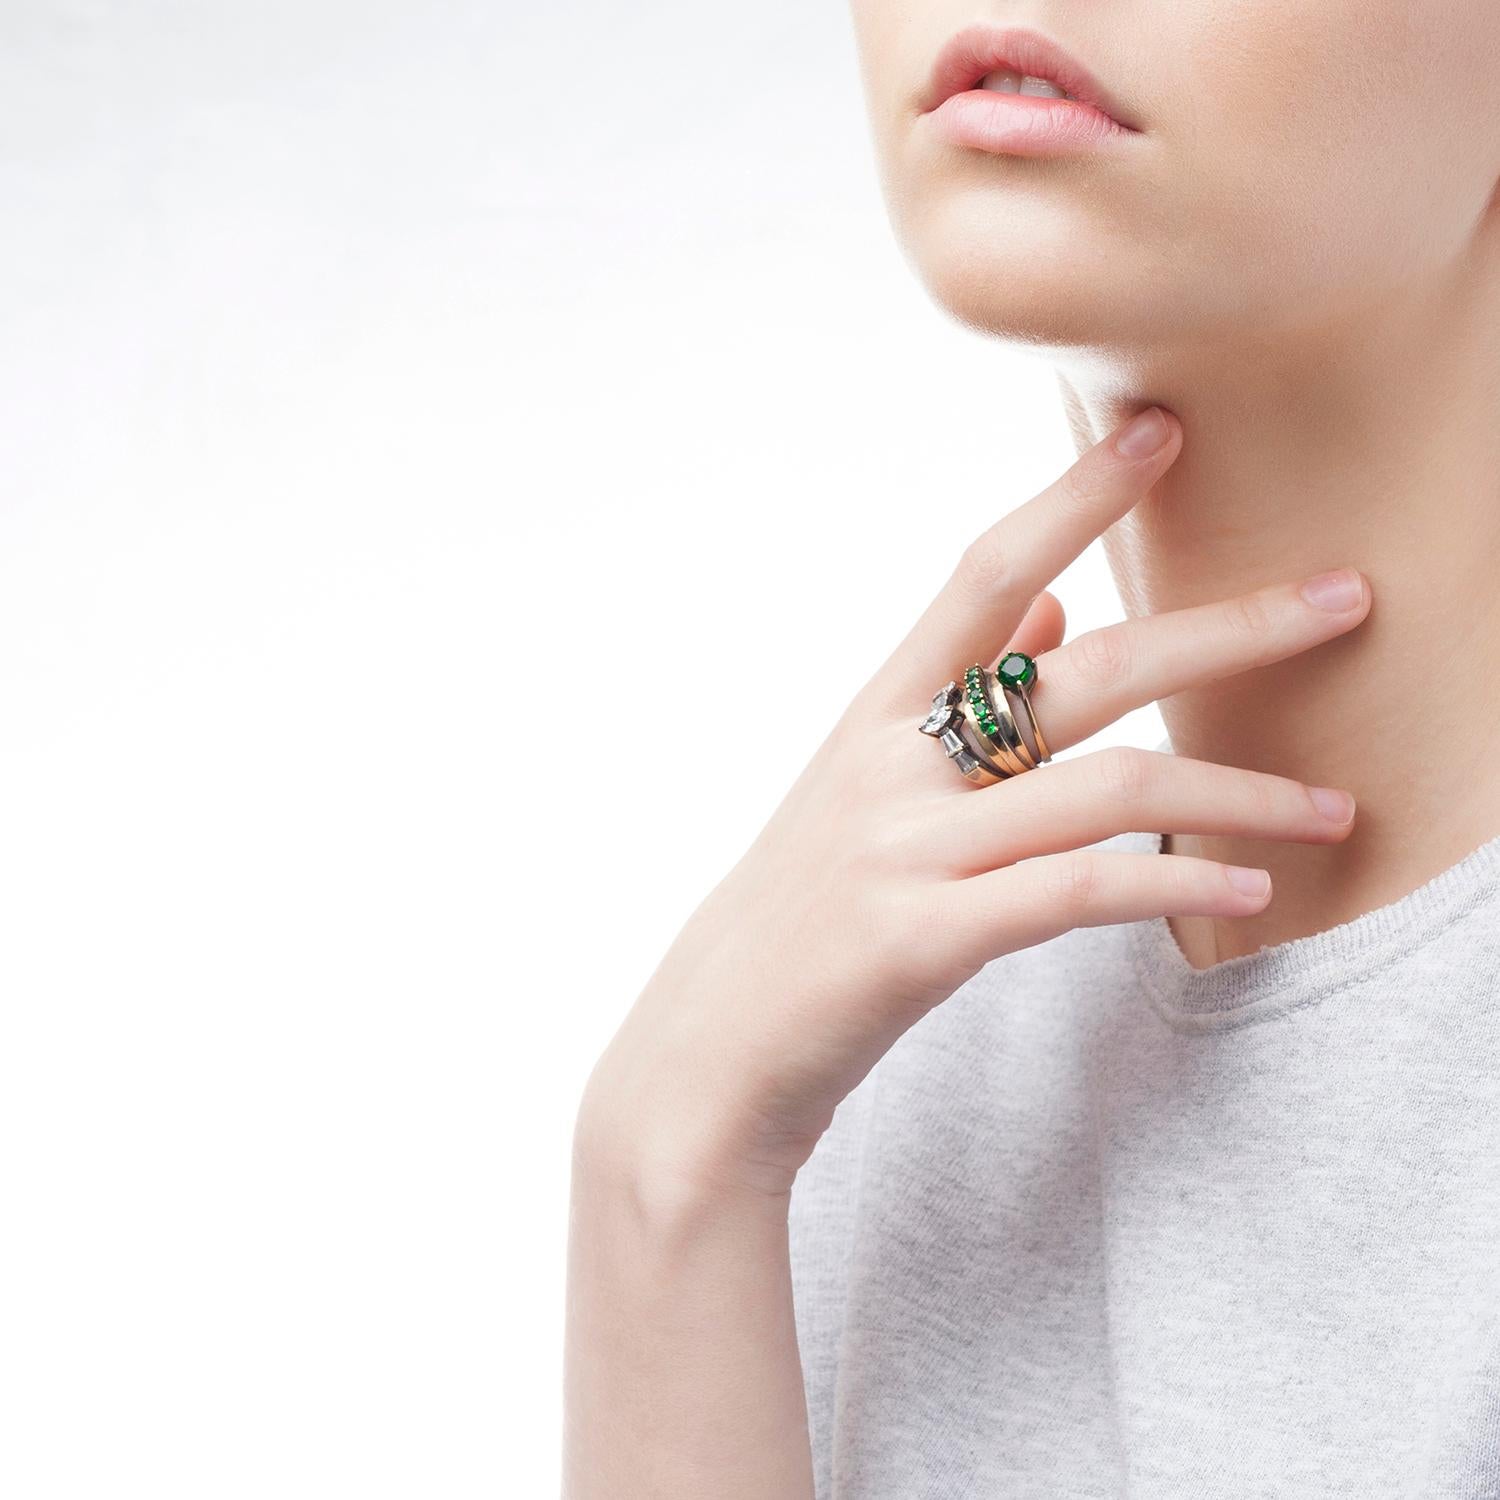 Three single rings stacked together to make one, this cocktail ring features an optical mix of emerald green and white crystals set by hand. Loaded with unexpected charm, the stacked ring exudes Iosselliani's love for shimmering crystals. Designed